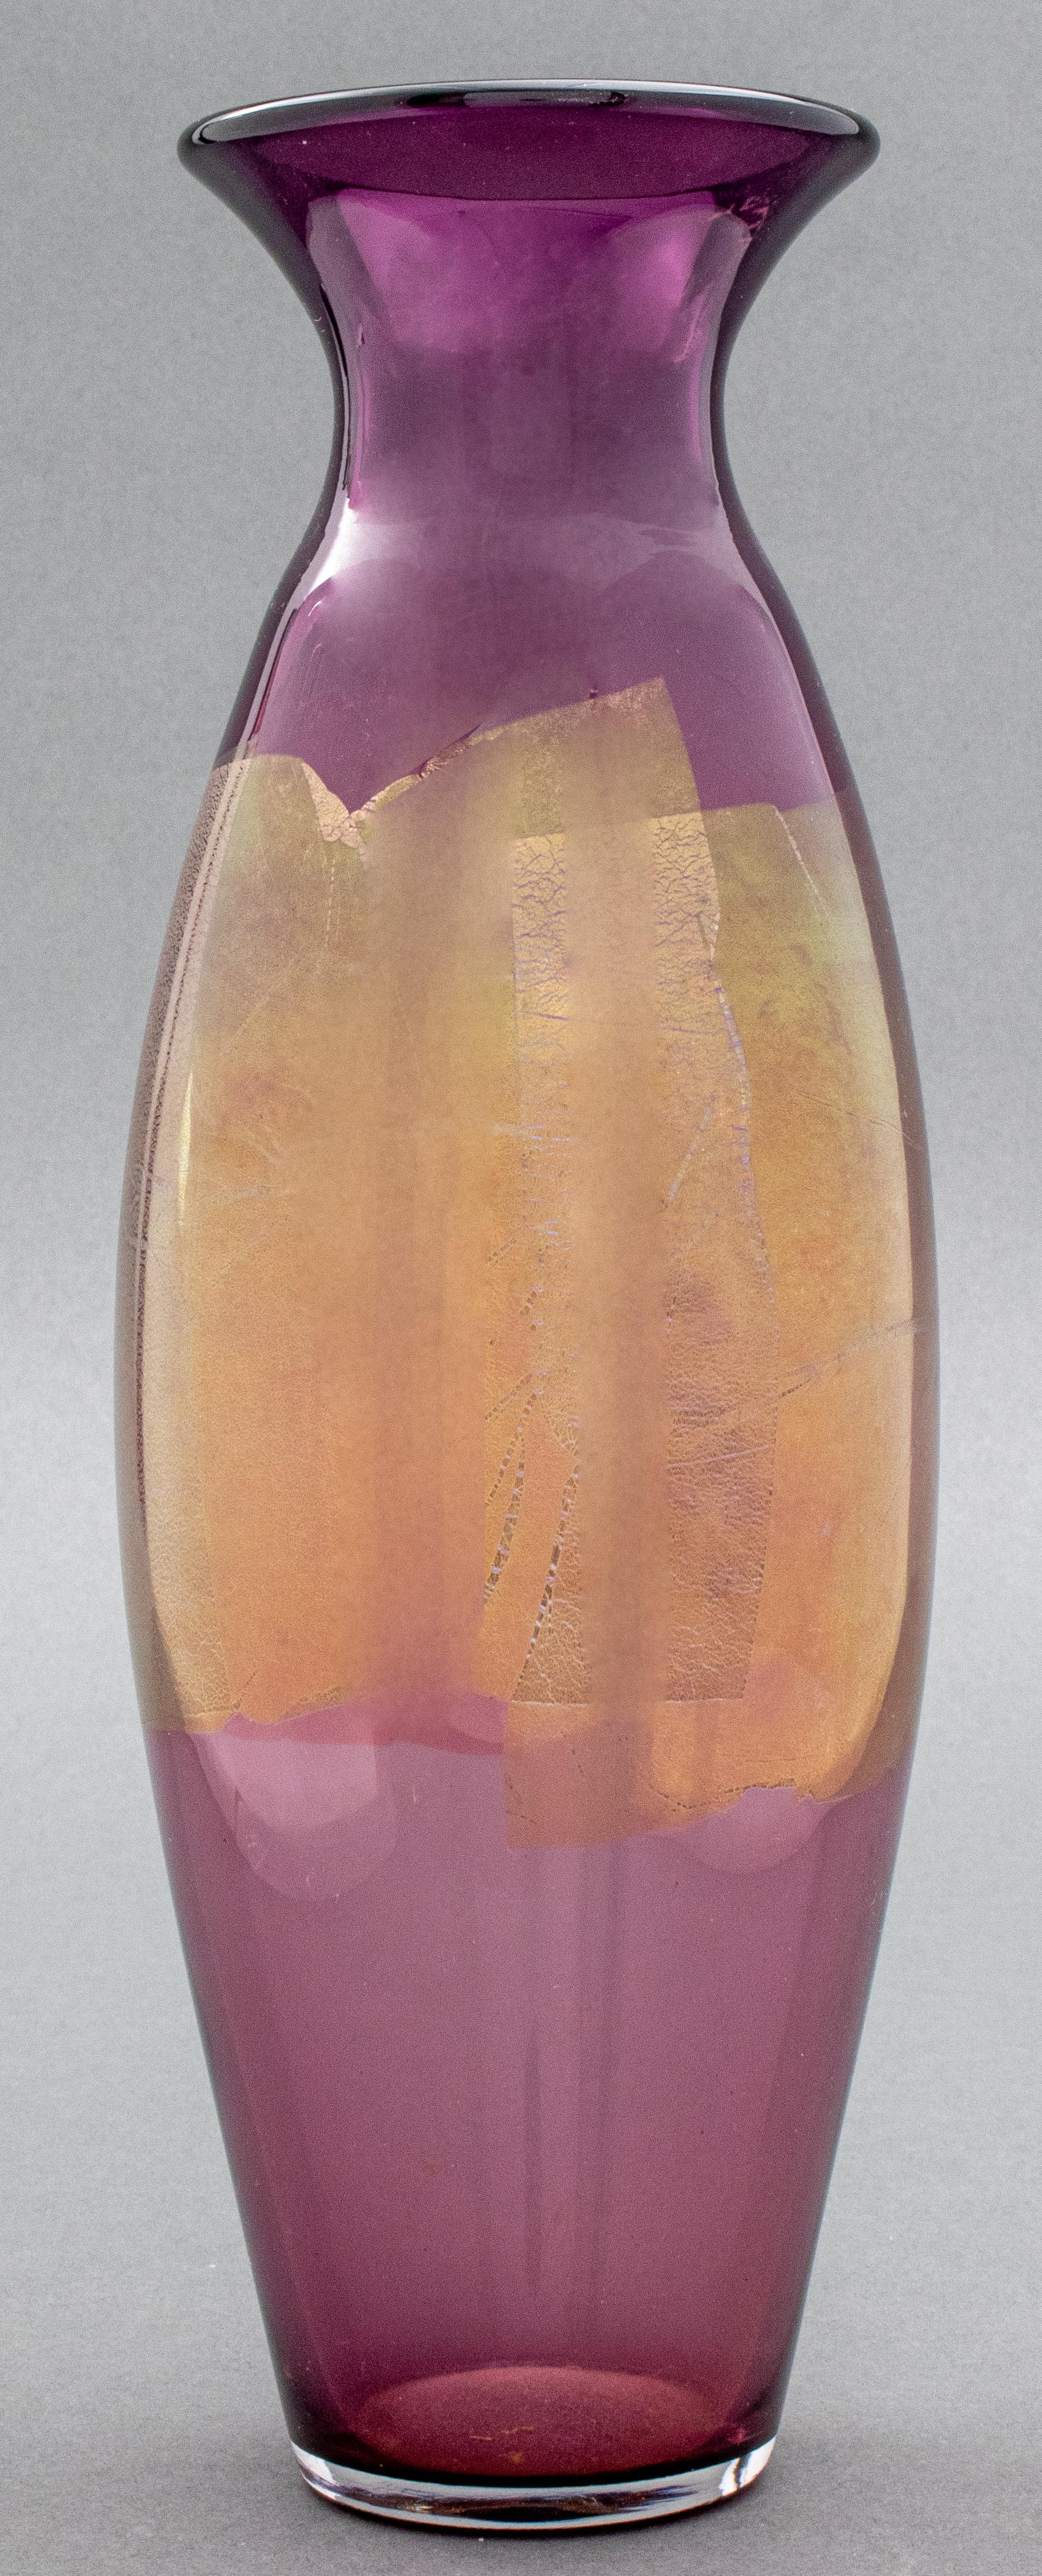 Jeff Zimmerman (American, b. 1968) for Tiffany & Company purple glass vase with gold leaf decoration encircling the body, incised signature to underside. 12.75